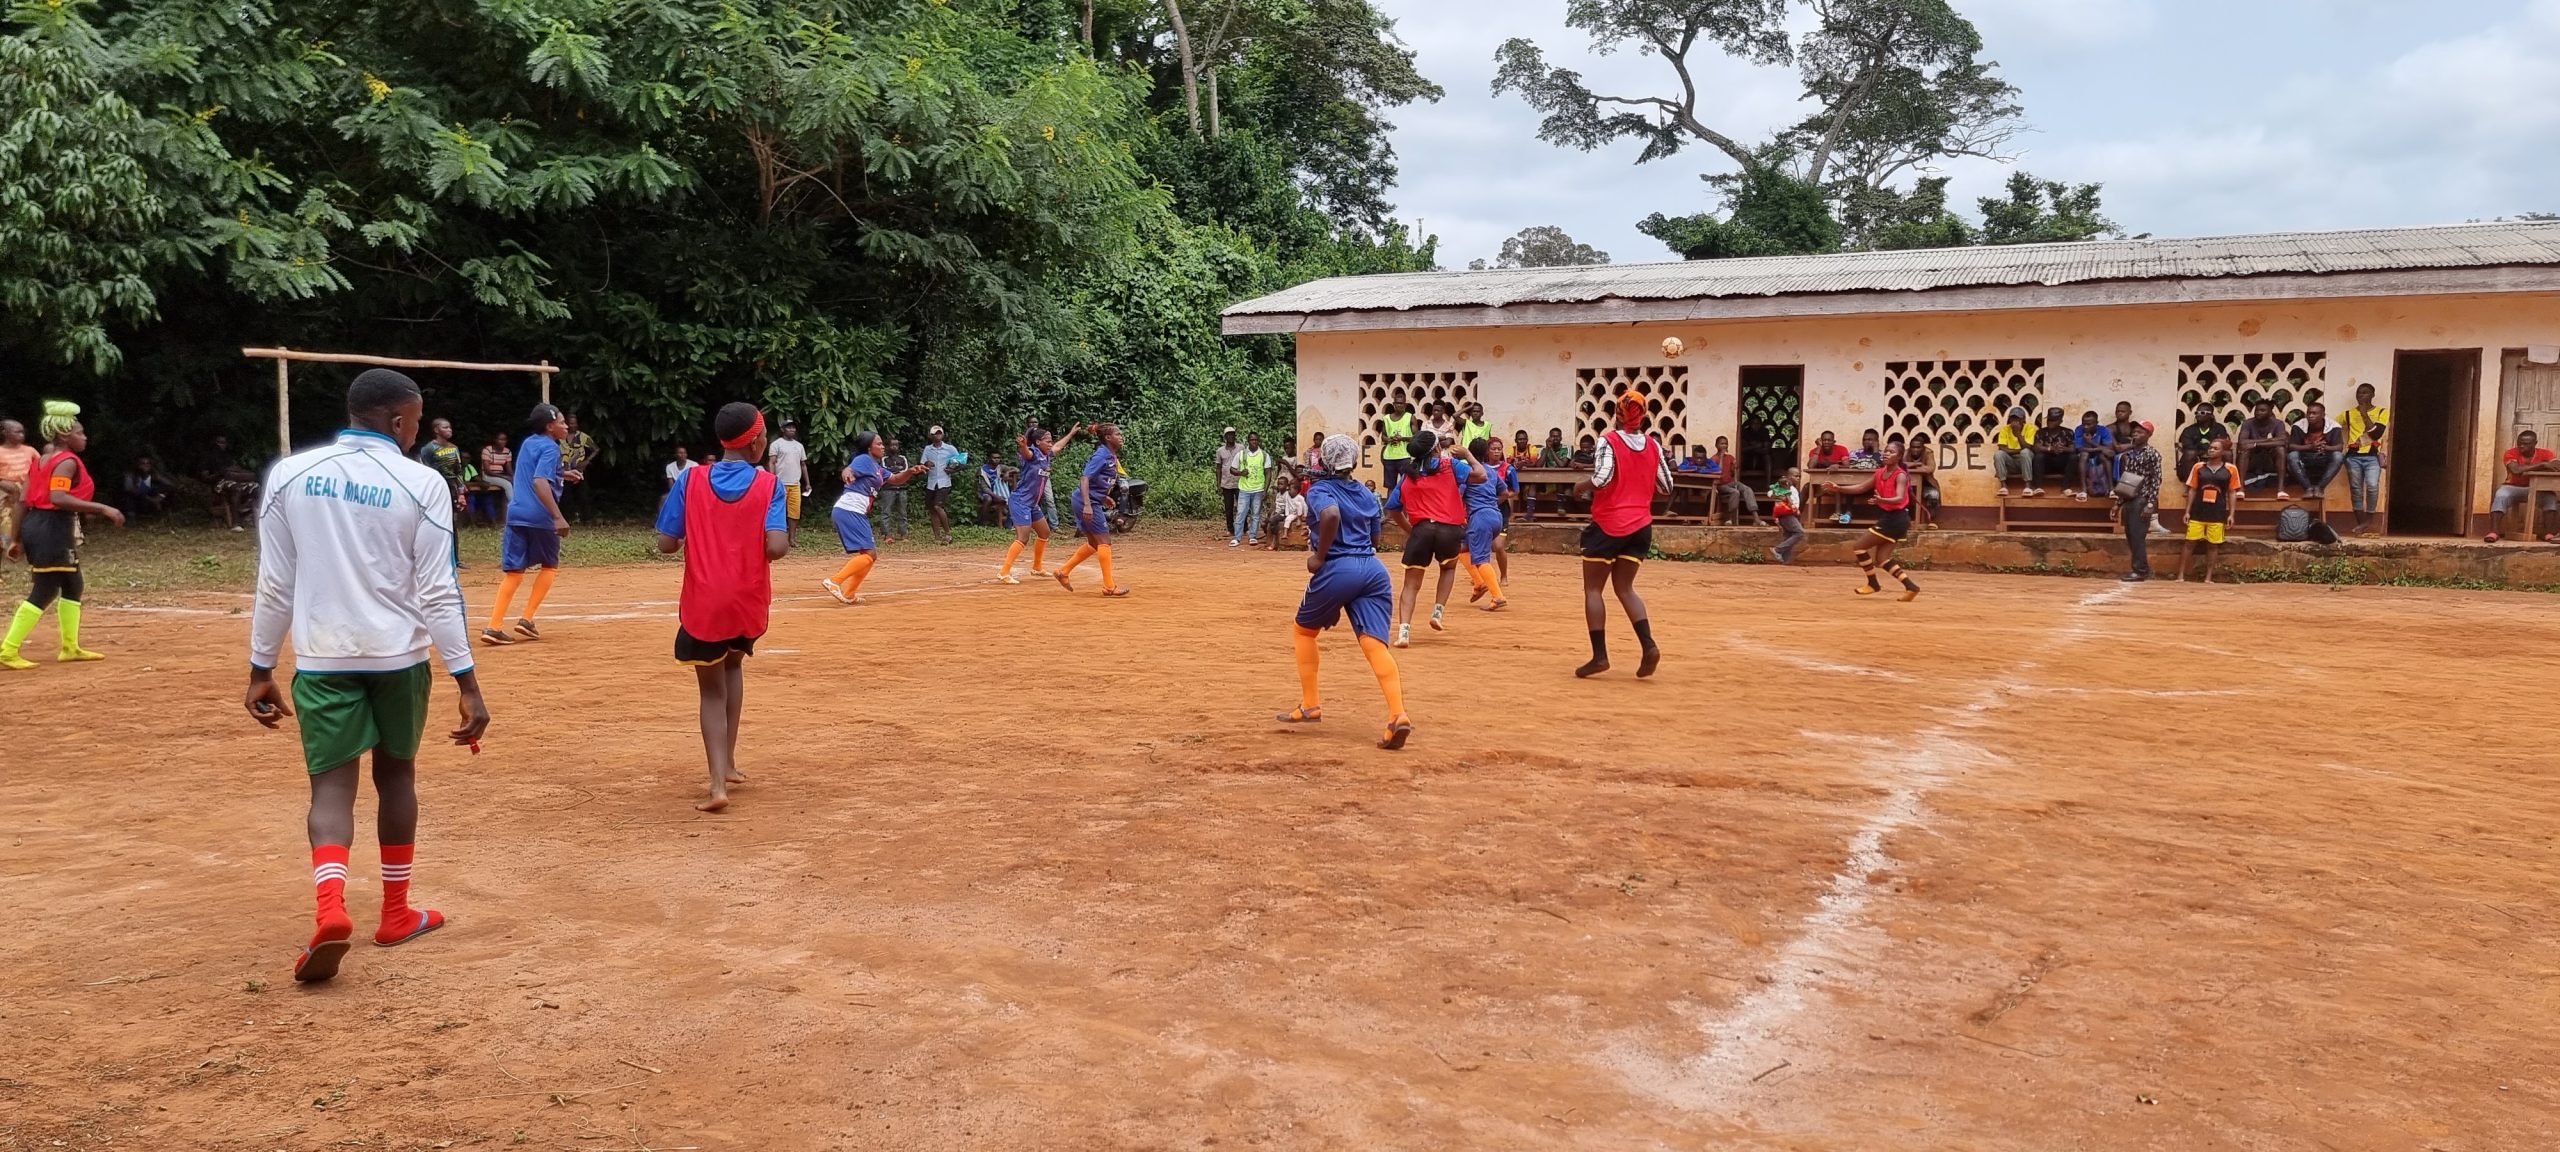 A group of youths playing handball on a dusty pitch